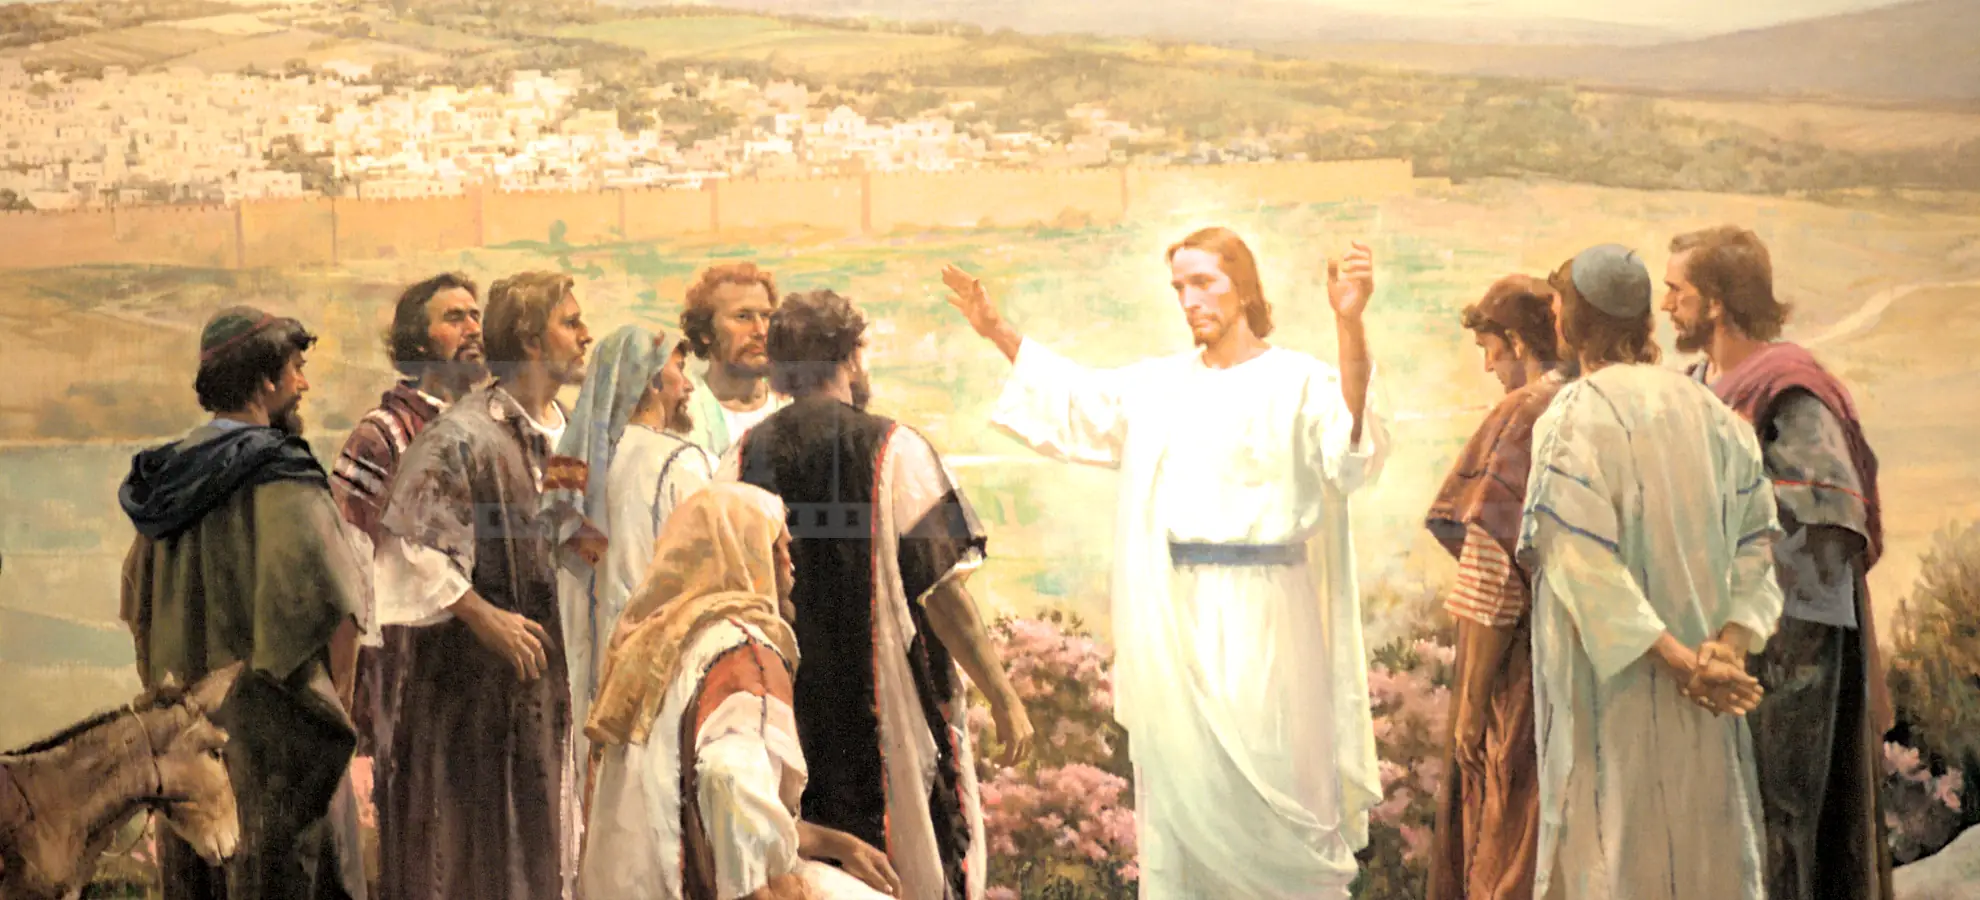 Painting inside the LDS temple in St George, Utah depicts Jesus and his followers